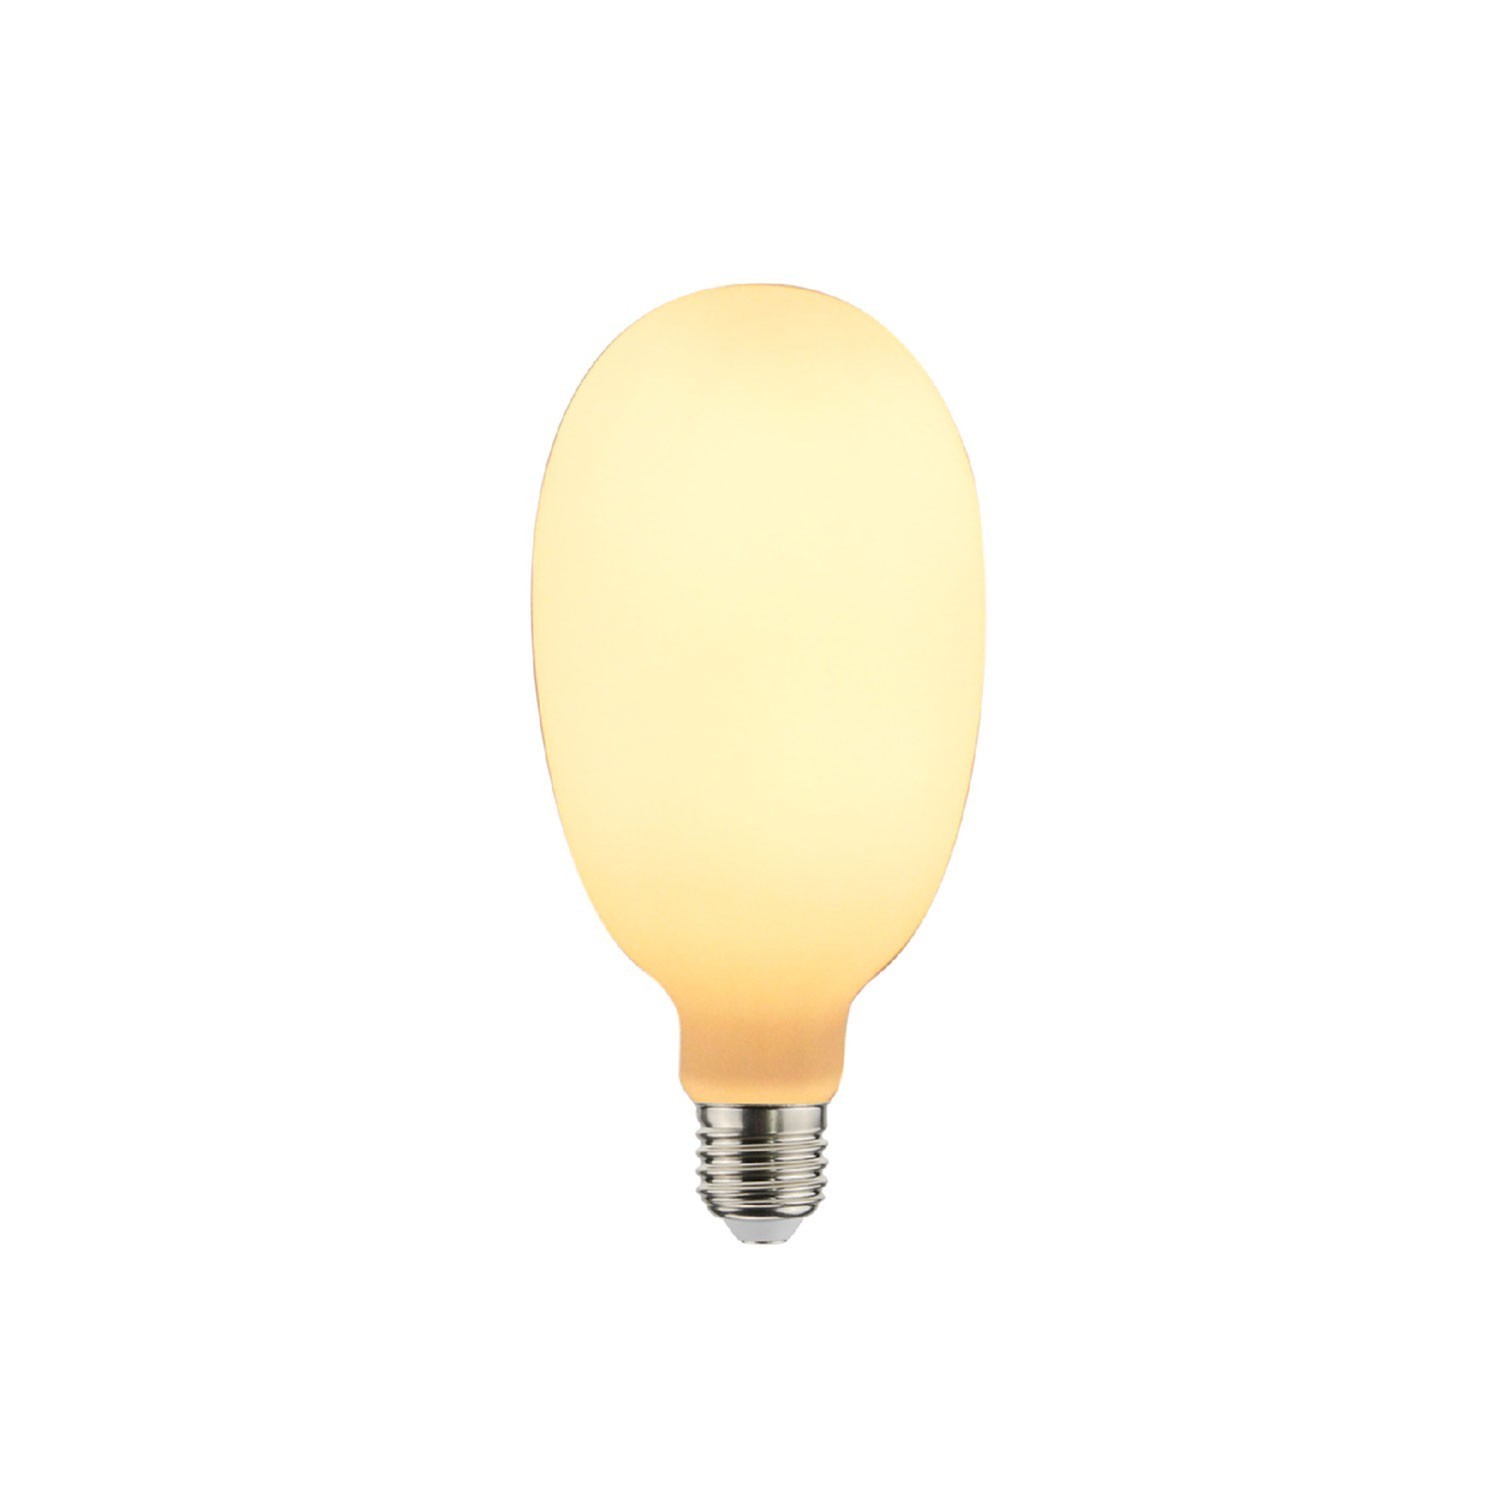 LED Porcelain Light Bulb Mammamia 13W 1521Lm E27 2700K Dimmable